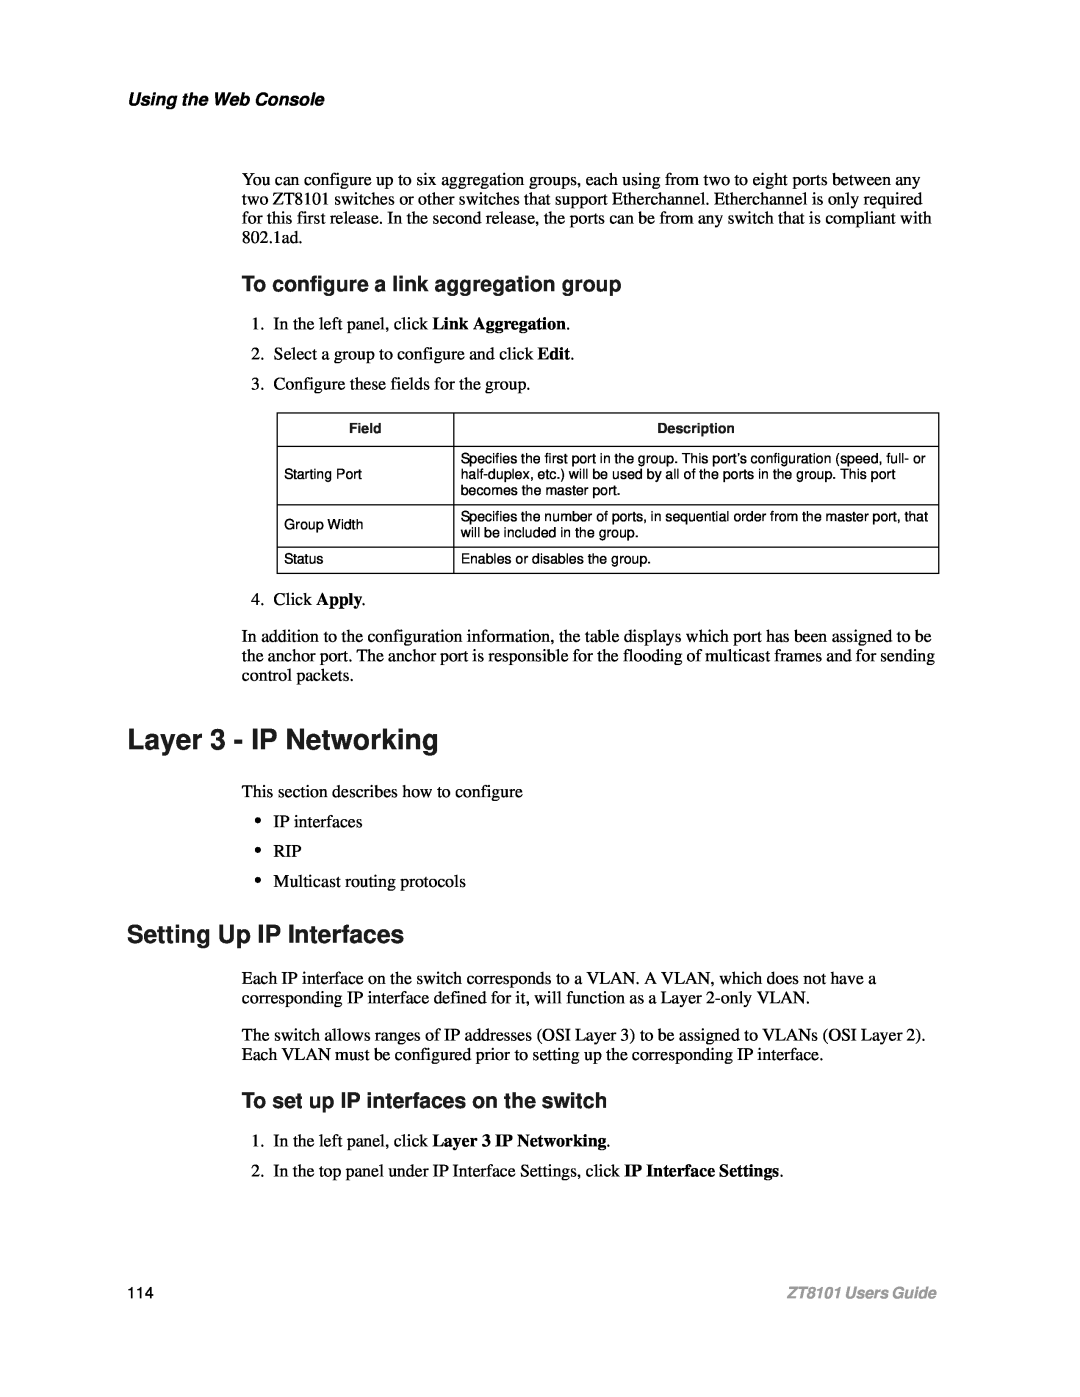 Intel ZT8101 user manual Layer 3 - IP Networking, To set up IP interfaces on the switch, Setting Up IP Interfaces 